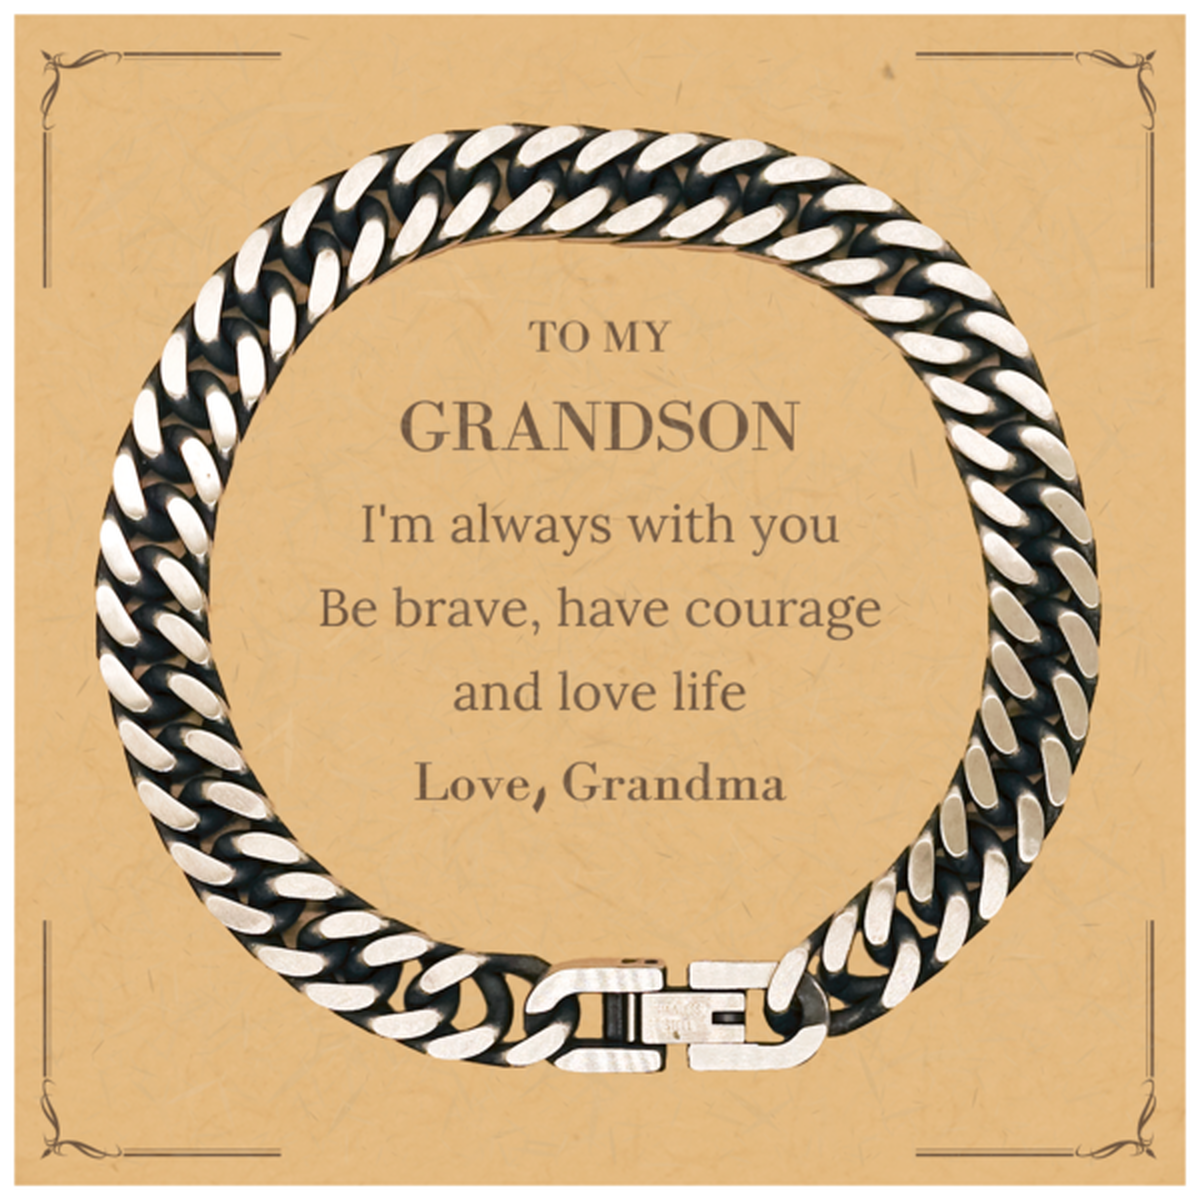 To My Grandson Gifts from Grandma, Unique Cuban Link Chain Bracelet Inspirational Christmas Birthday Graduation Gifts for Grandson I'm always with you. Be brave, have courage and love life. Love, Grandma